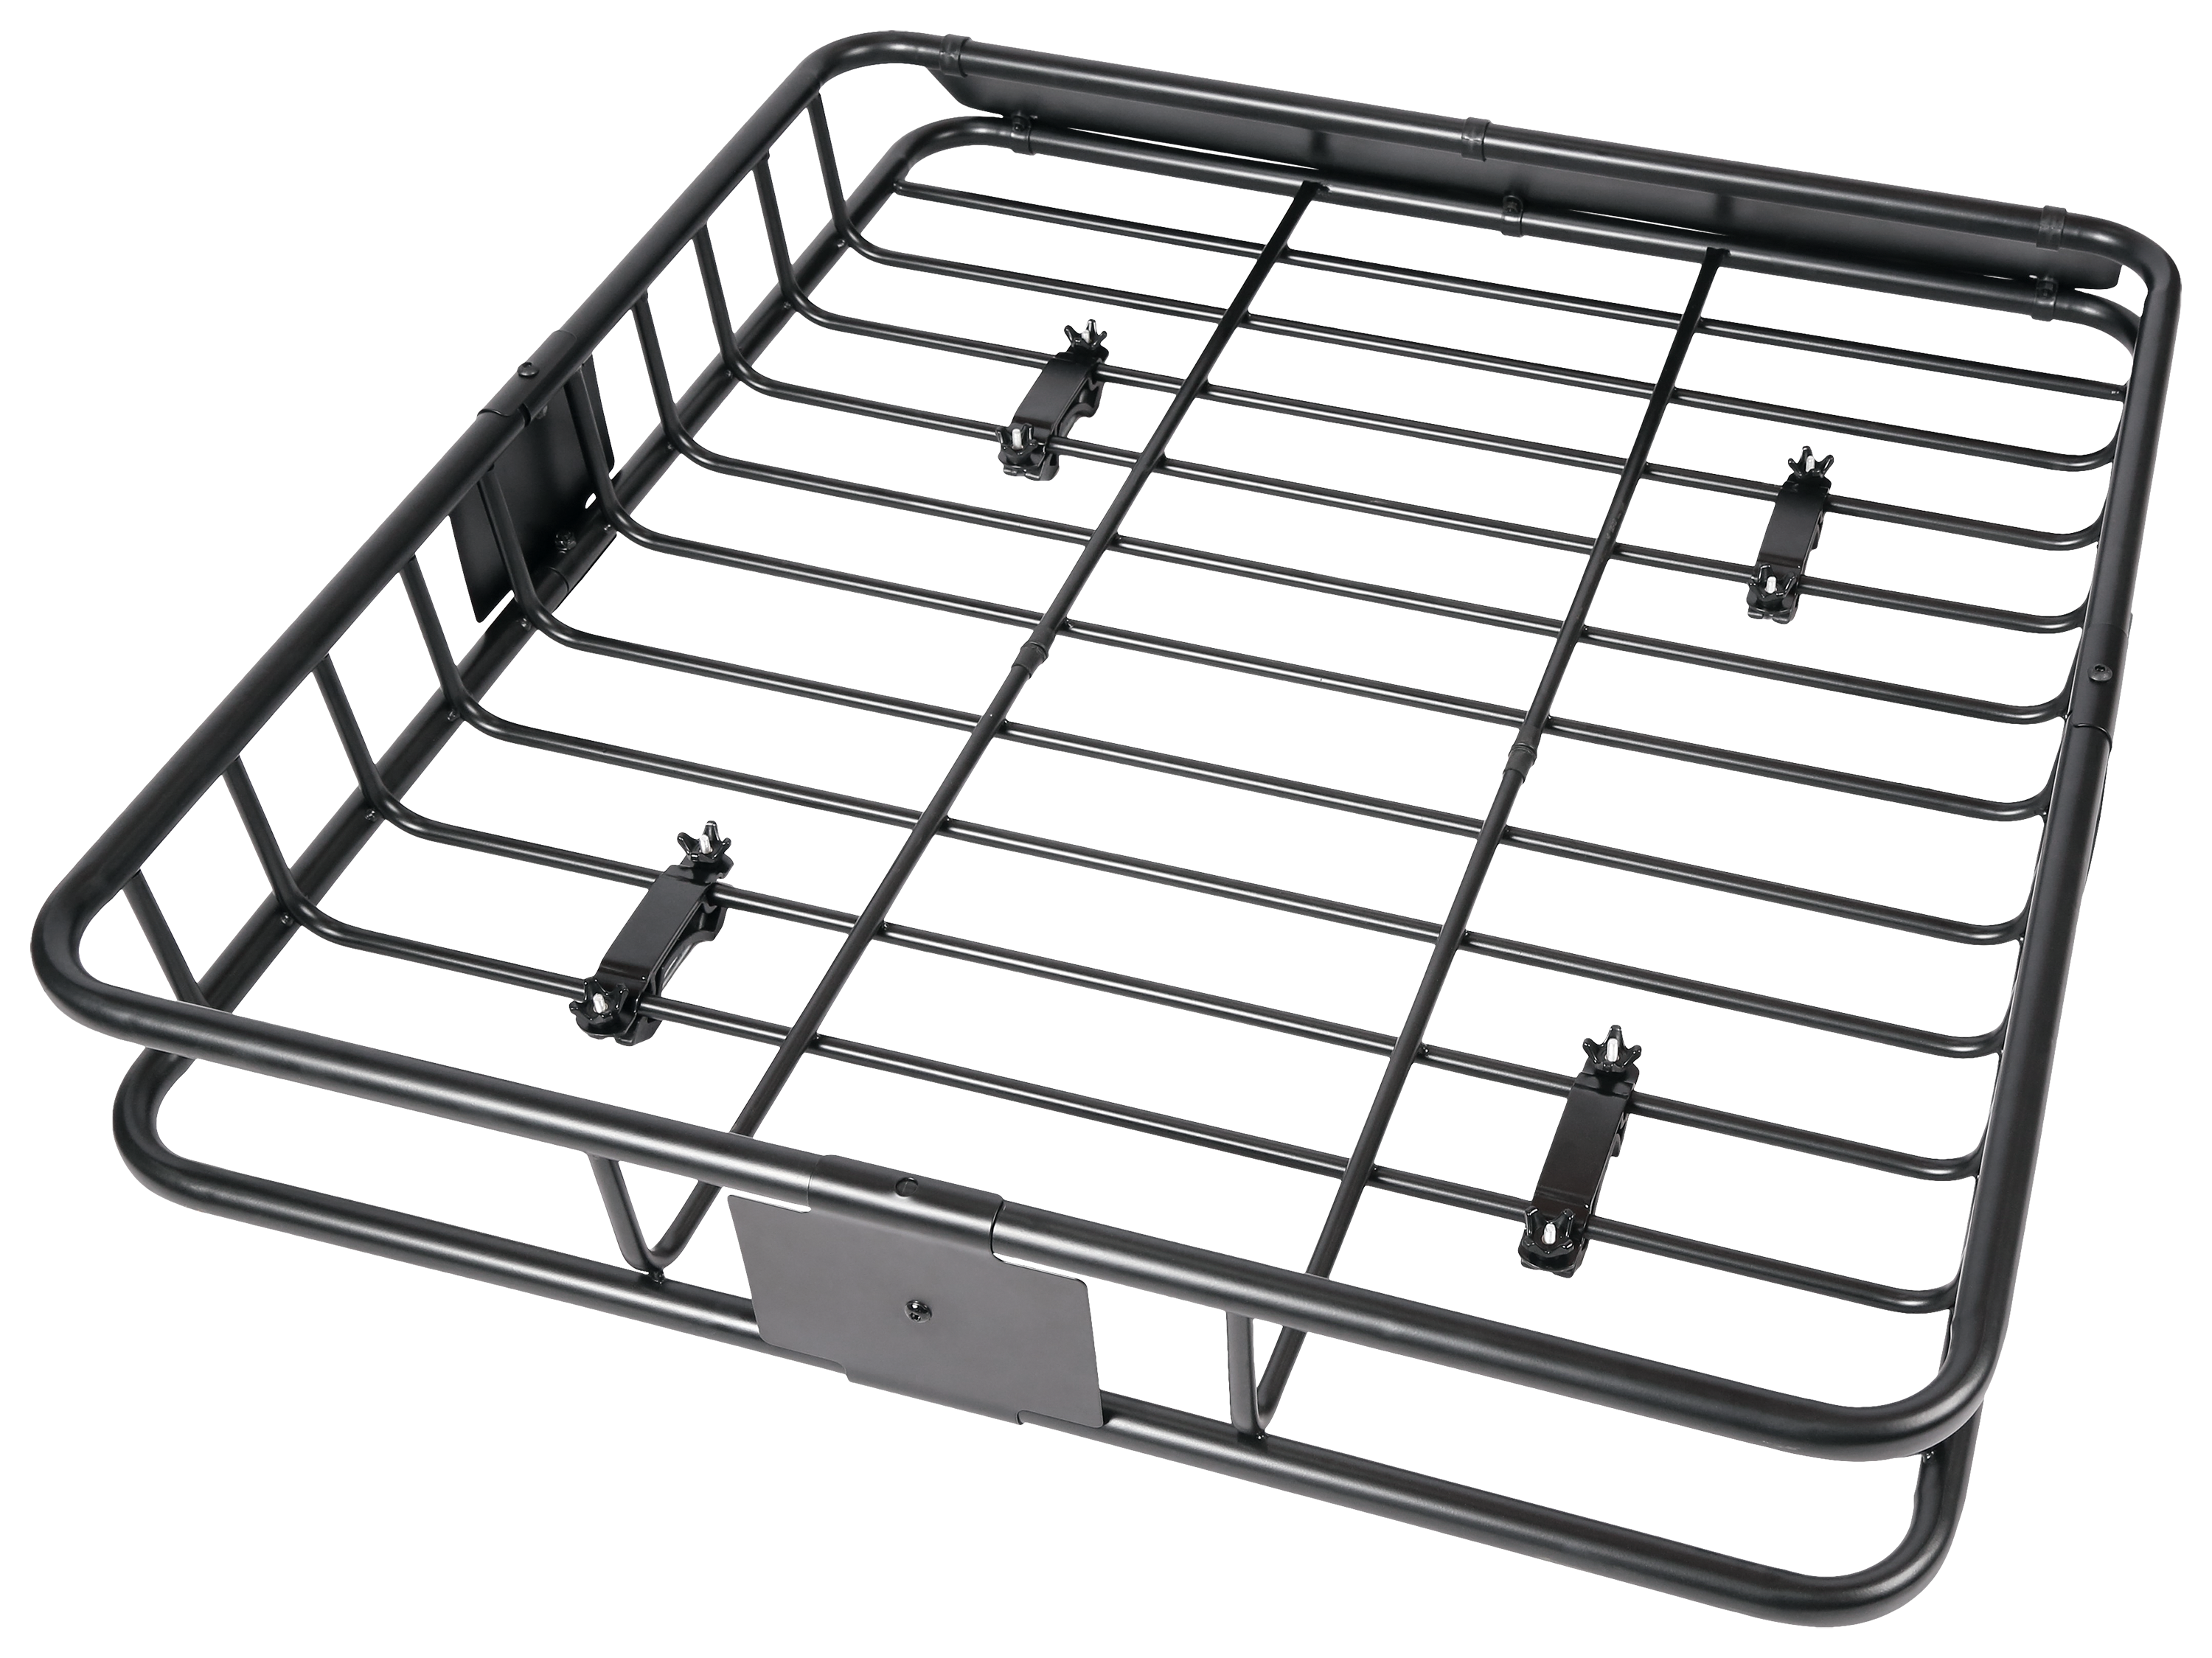 Roof Racks Carriers, Cargo Baskets, Roof Carriers, Roof Trays